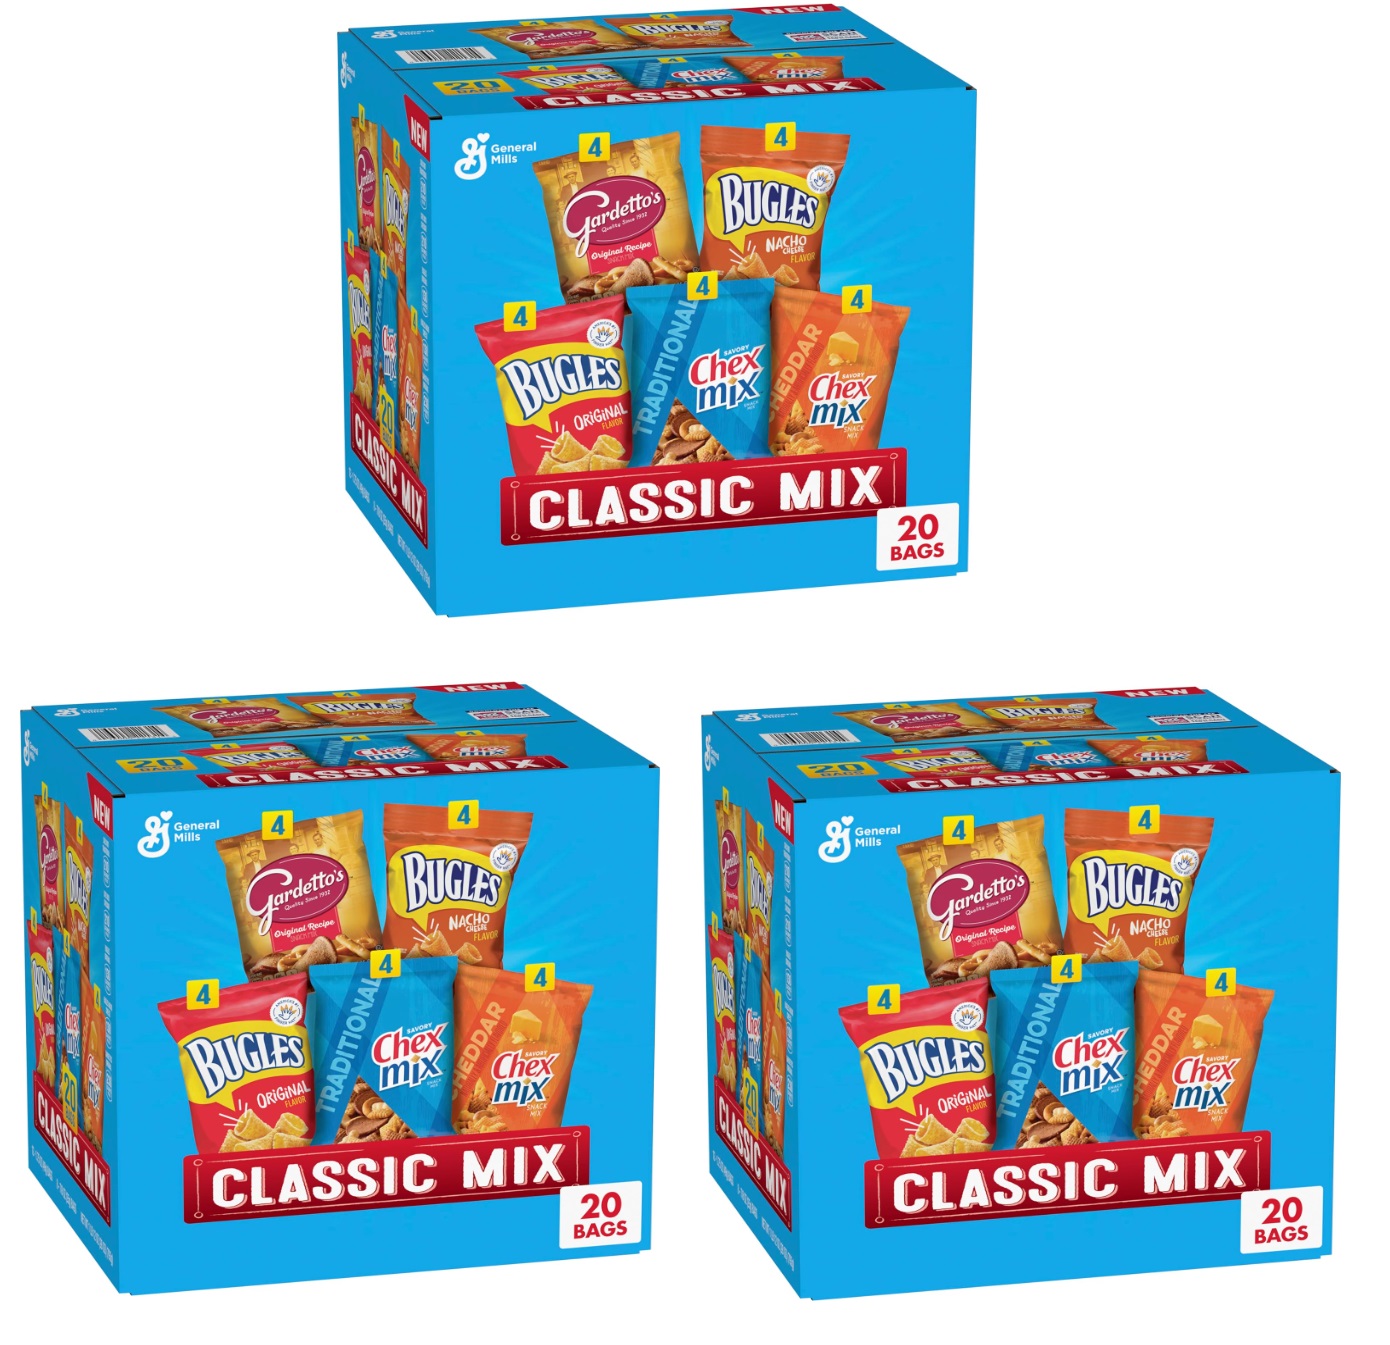 60-Count (84-Oz) Classic Mix Snack Variety Pack (Bugles Original & Nacho Cheese, Gardetto’s Original Recipe, Chex Mix Traditional & Cheddar) $20.97 + Free Shipping